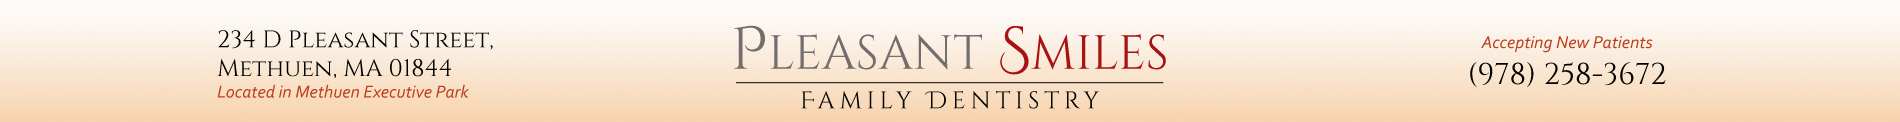 Pleasant Smiles Family and Cosmetic Dentist in Methuen MA